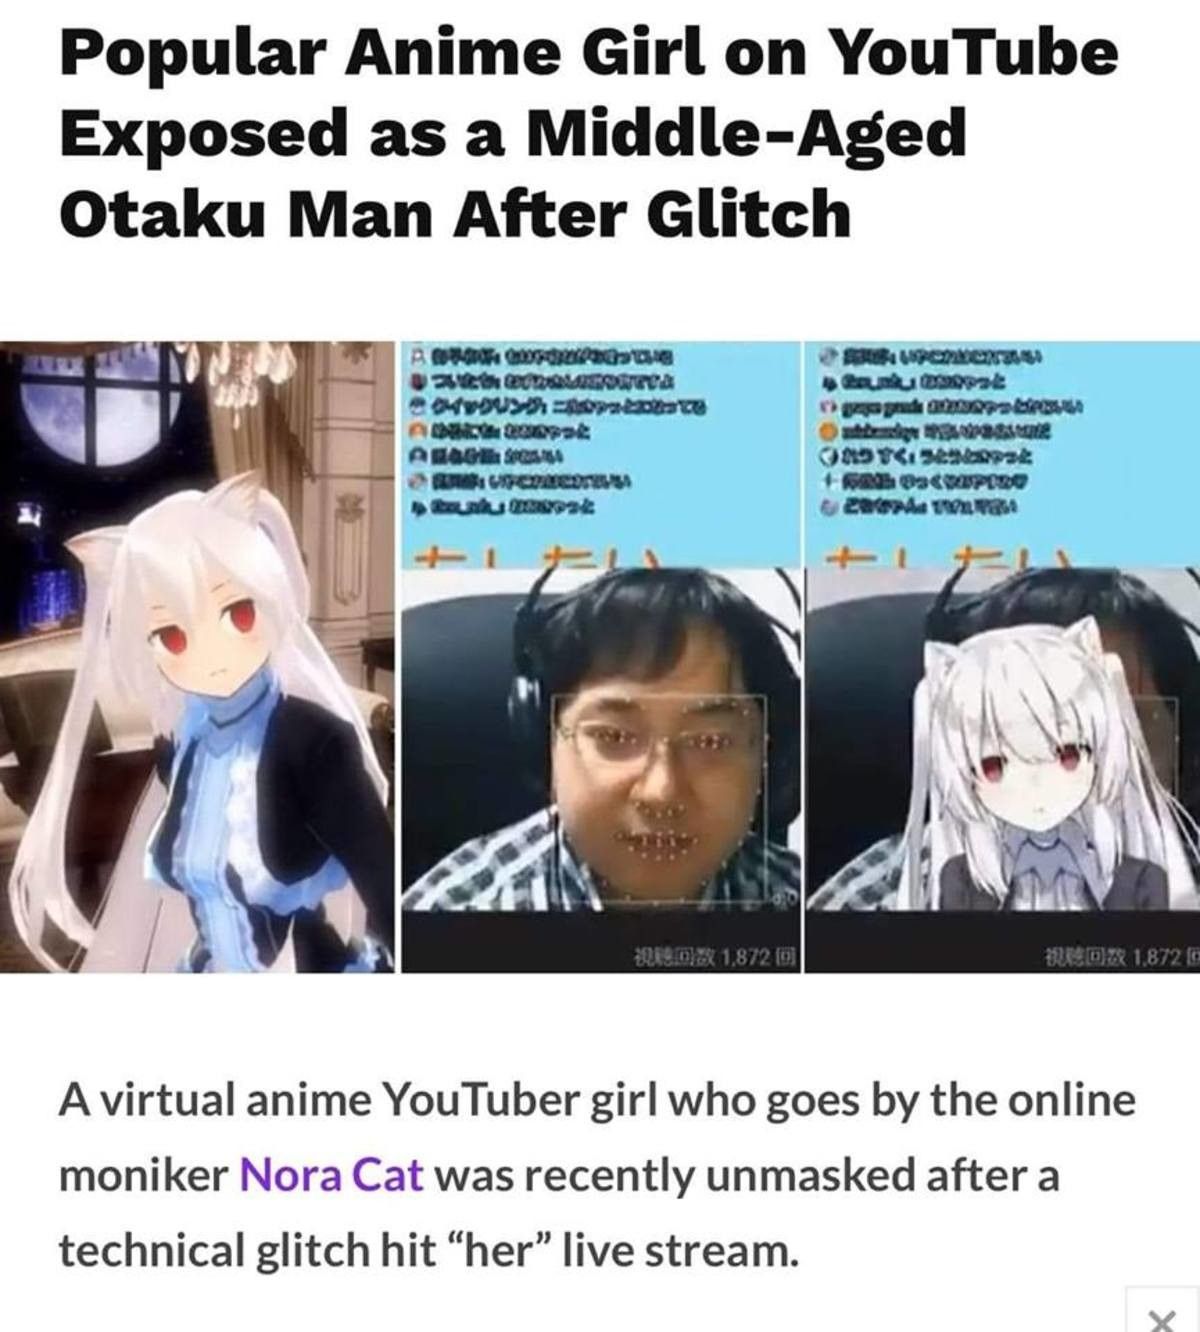 There are no women on the internet, only men and weebs